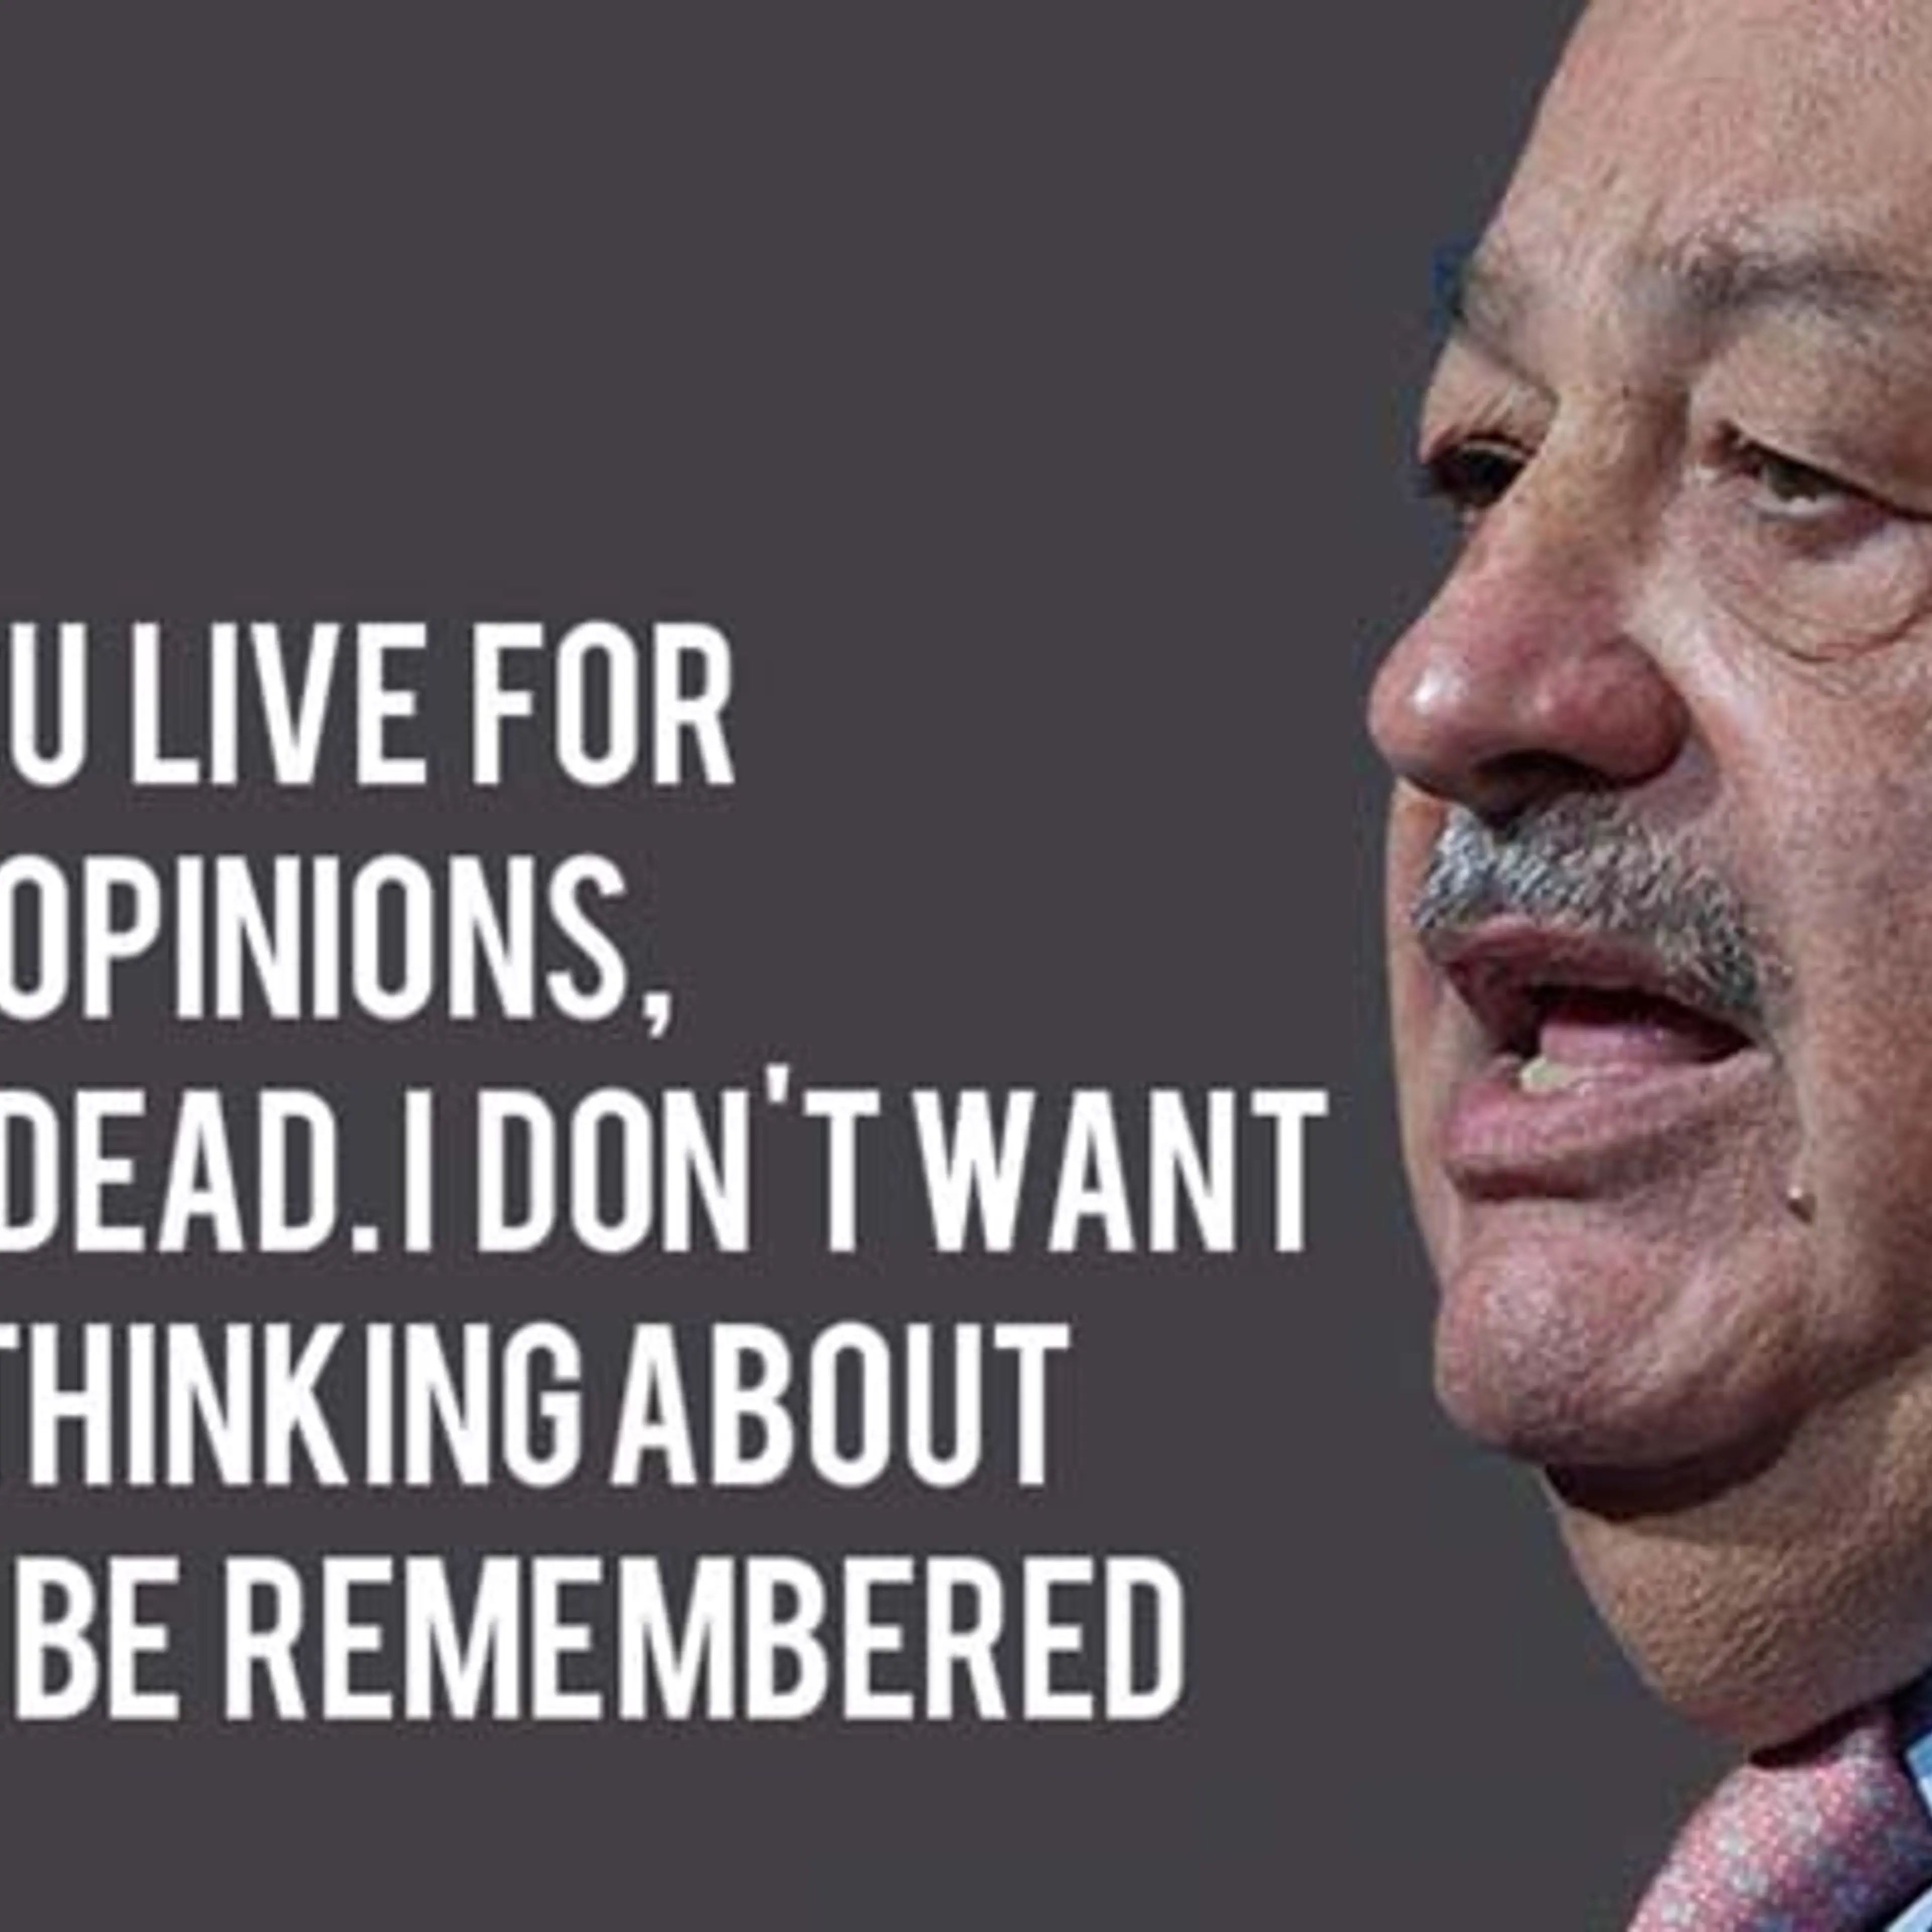 23 most notable quotes and guiding principles from the second richest person of the world Carlos Slim